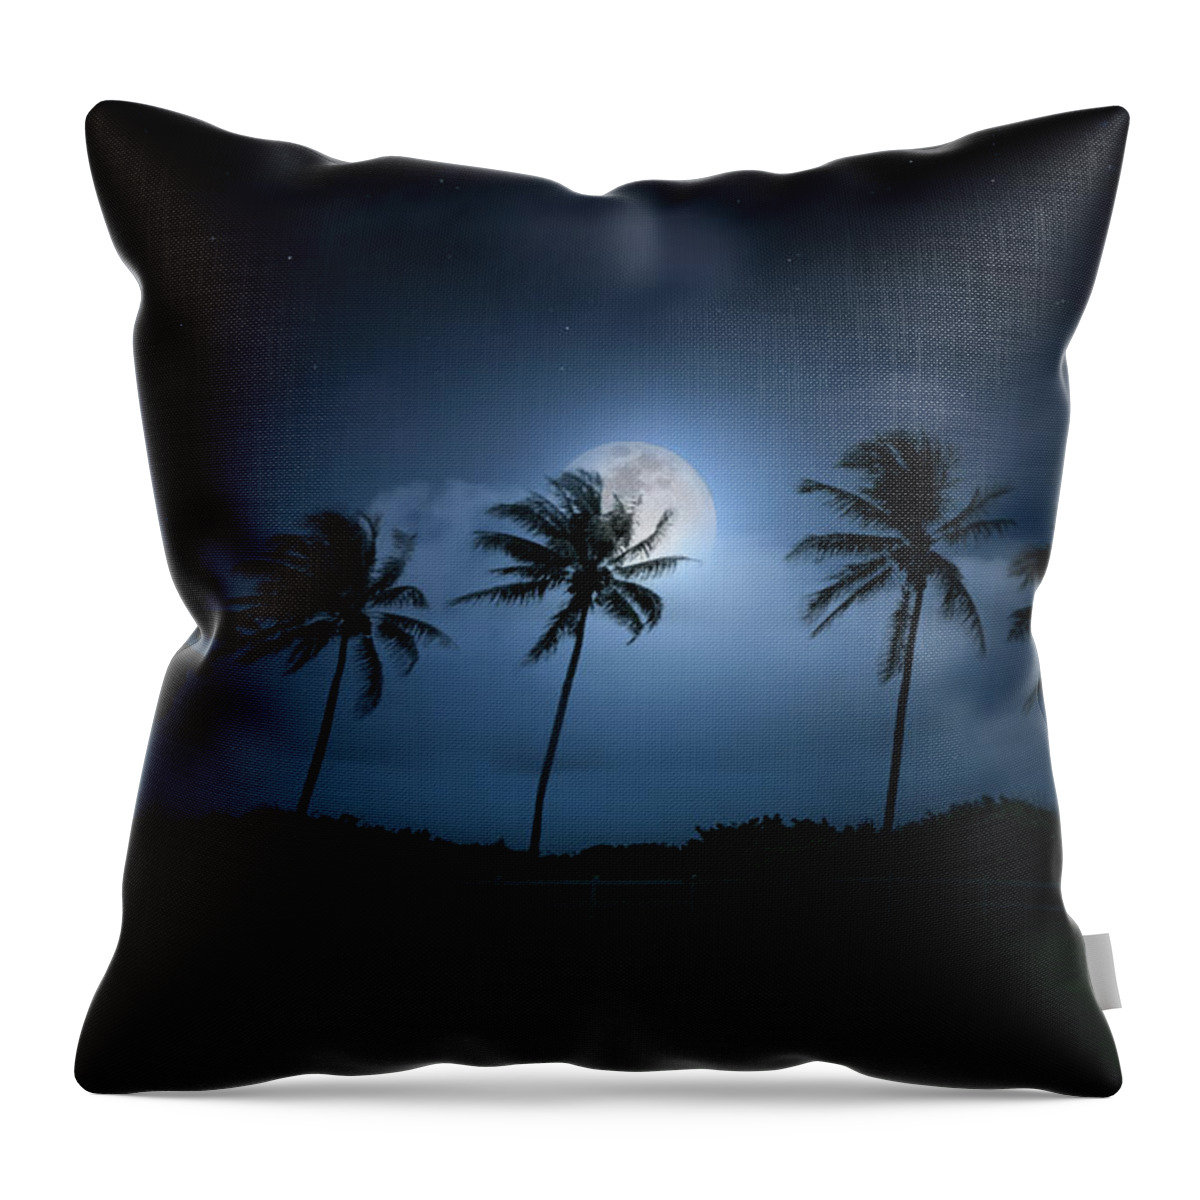 Moon Throw Pillow featuring the photograph Under a Tropical Moon by Mark Andrew Thomas